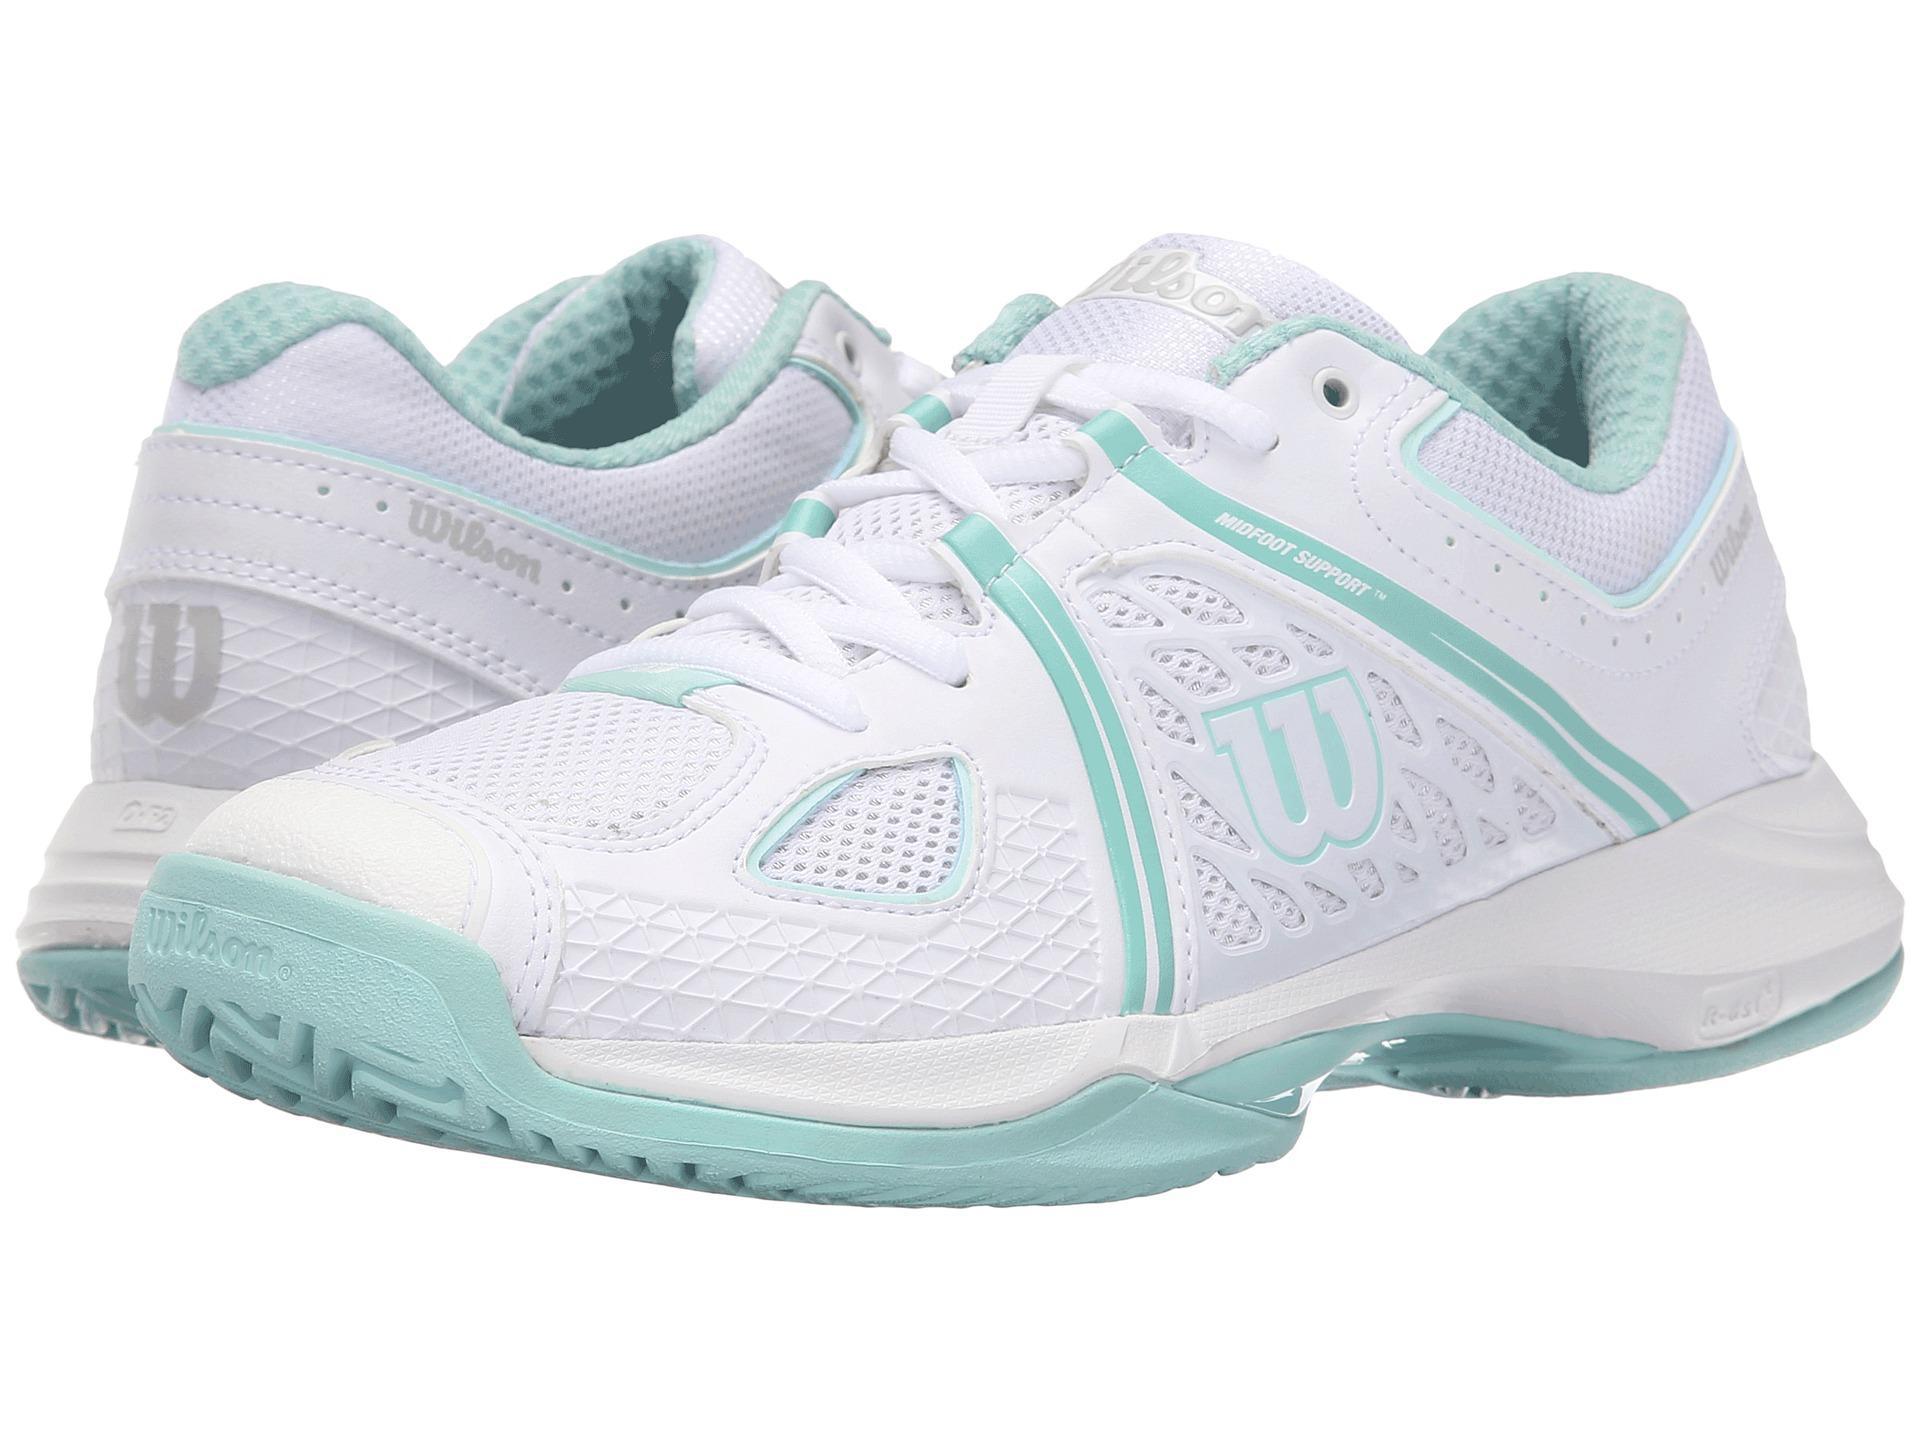 Wilson Womens NVision All Court Tennis Shoes (White/Blue/Mint)